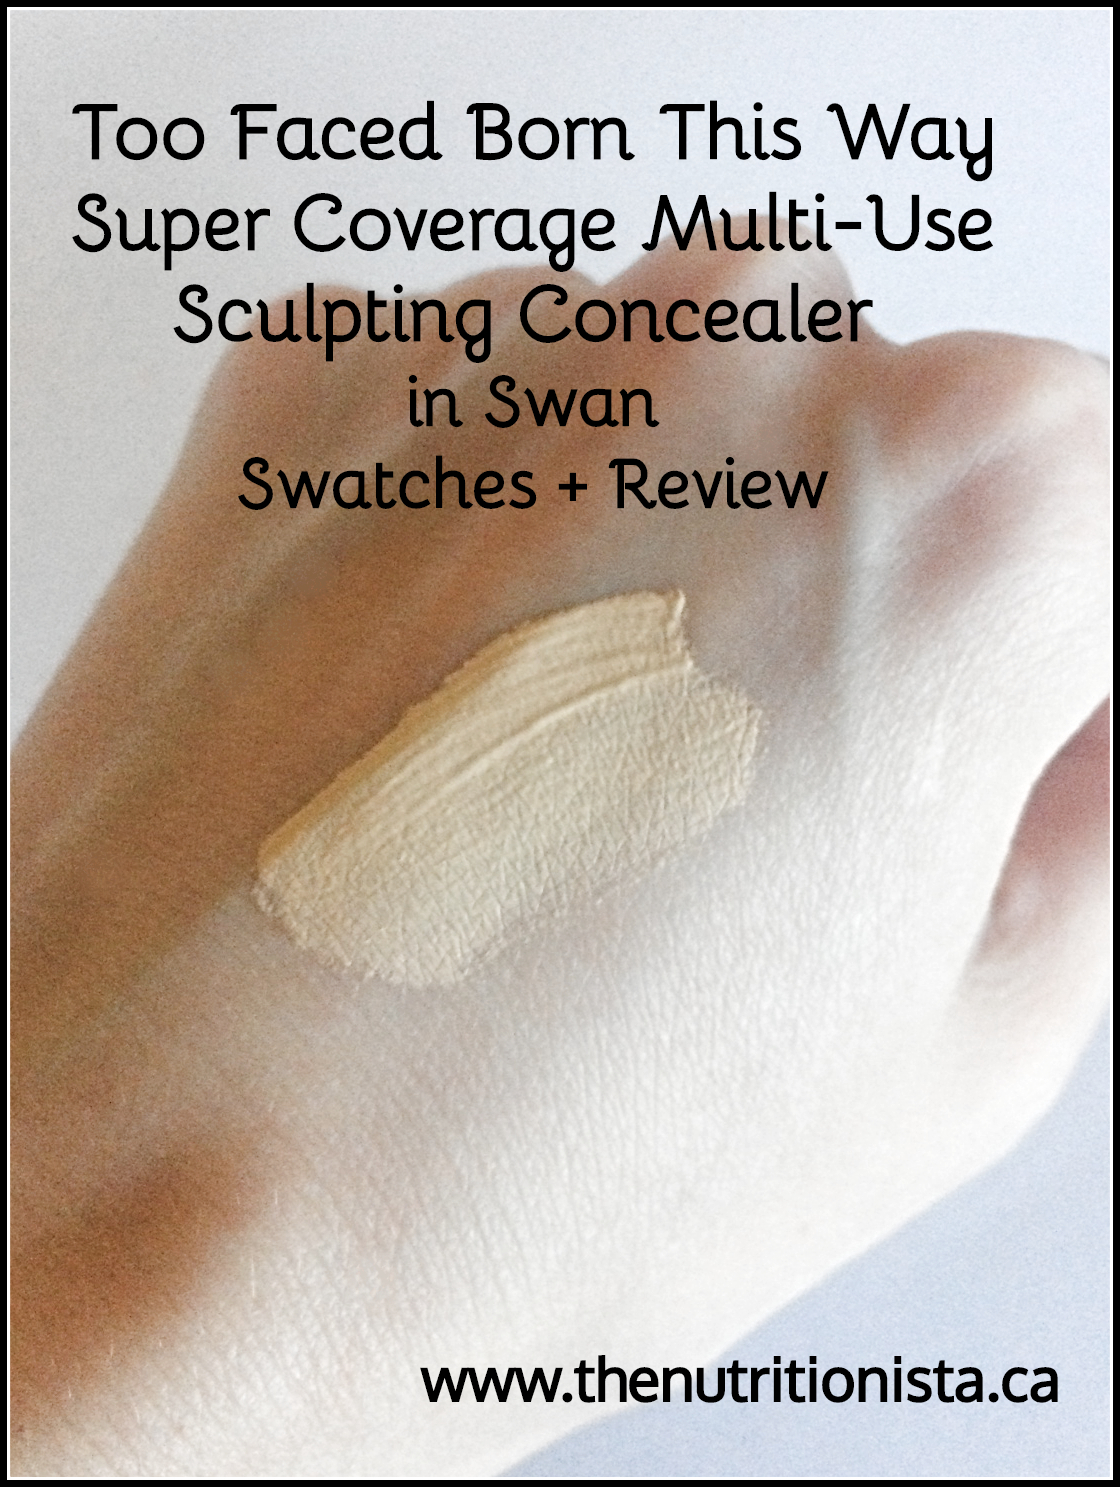 Too Faced Born this Way Super Coverage Multi-Use Sculpting Concealer in Swan Review + Swatches | Via@bcnutritionista